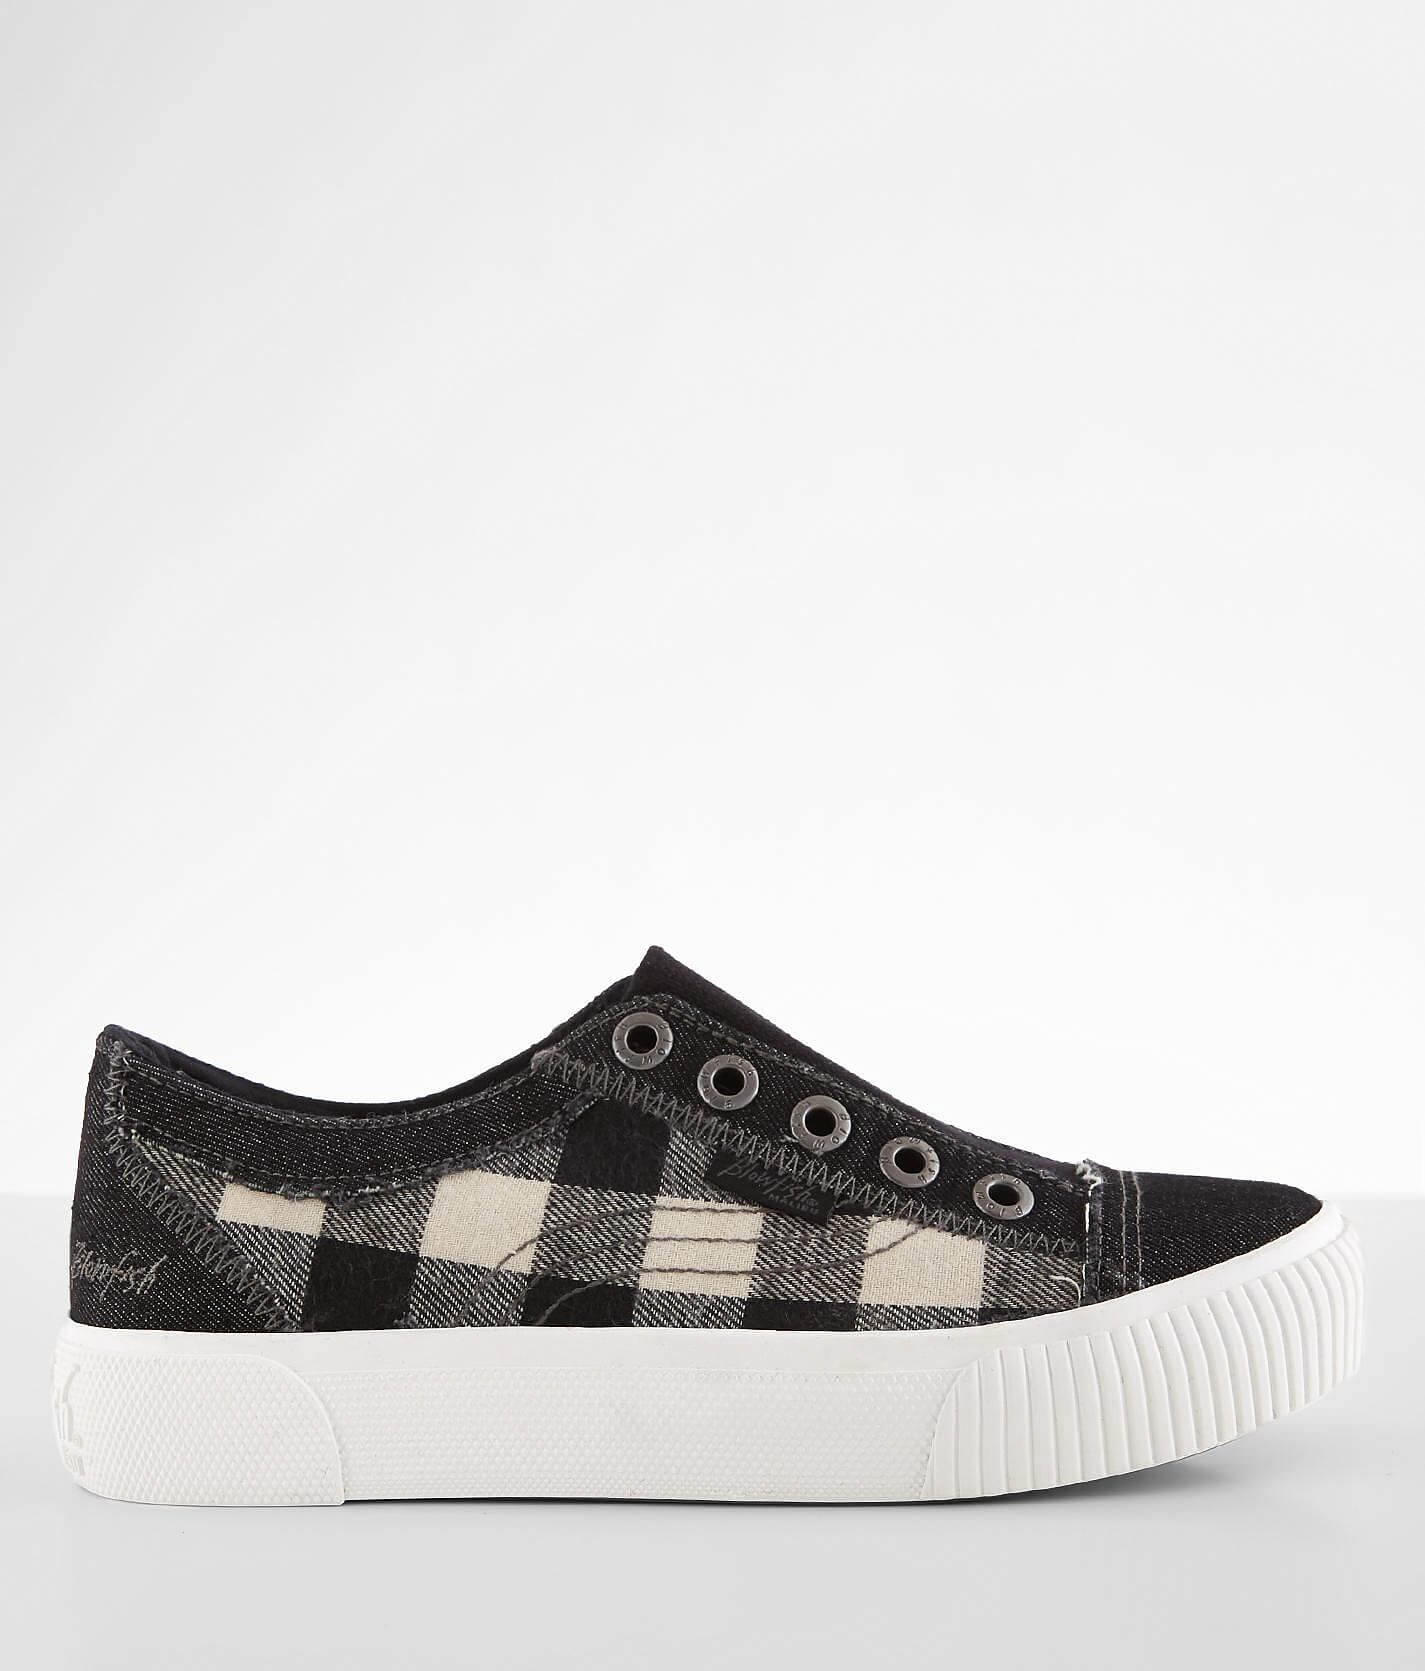 black and white plaid sneakers